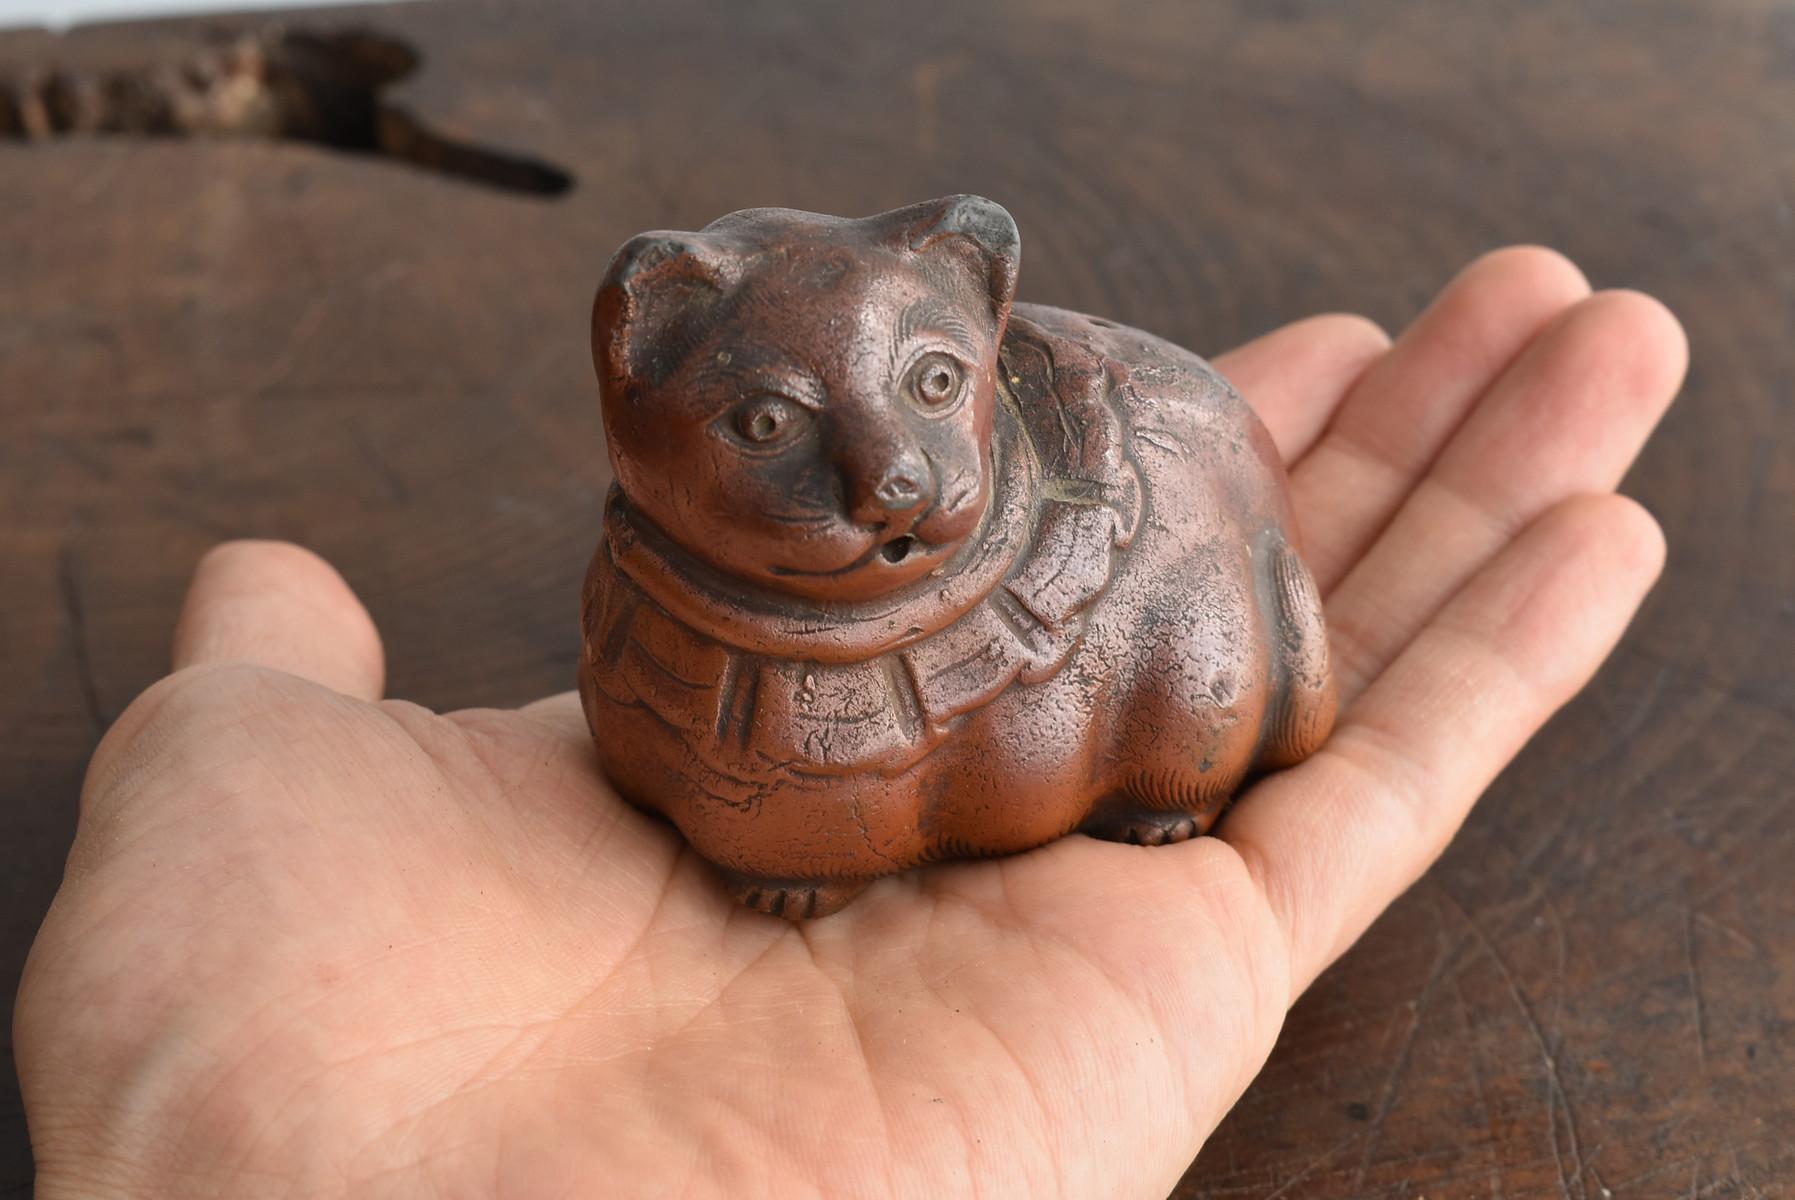 A cat-shaped calligraphy tool of 